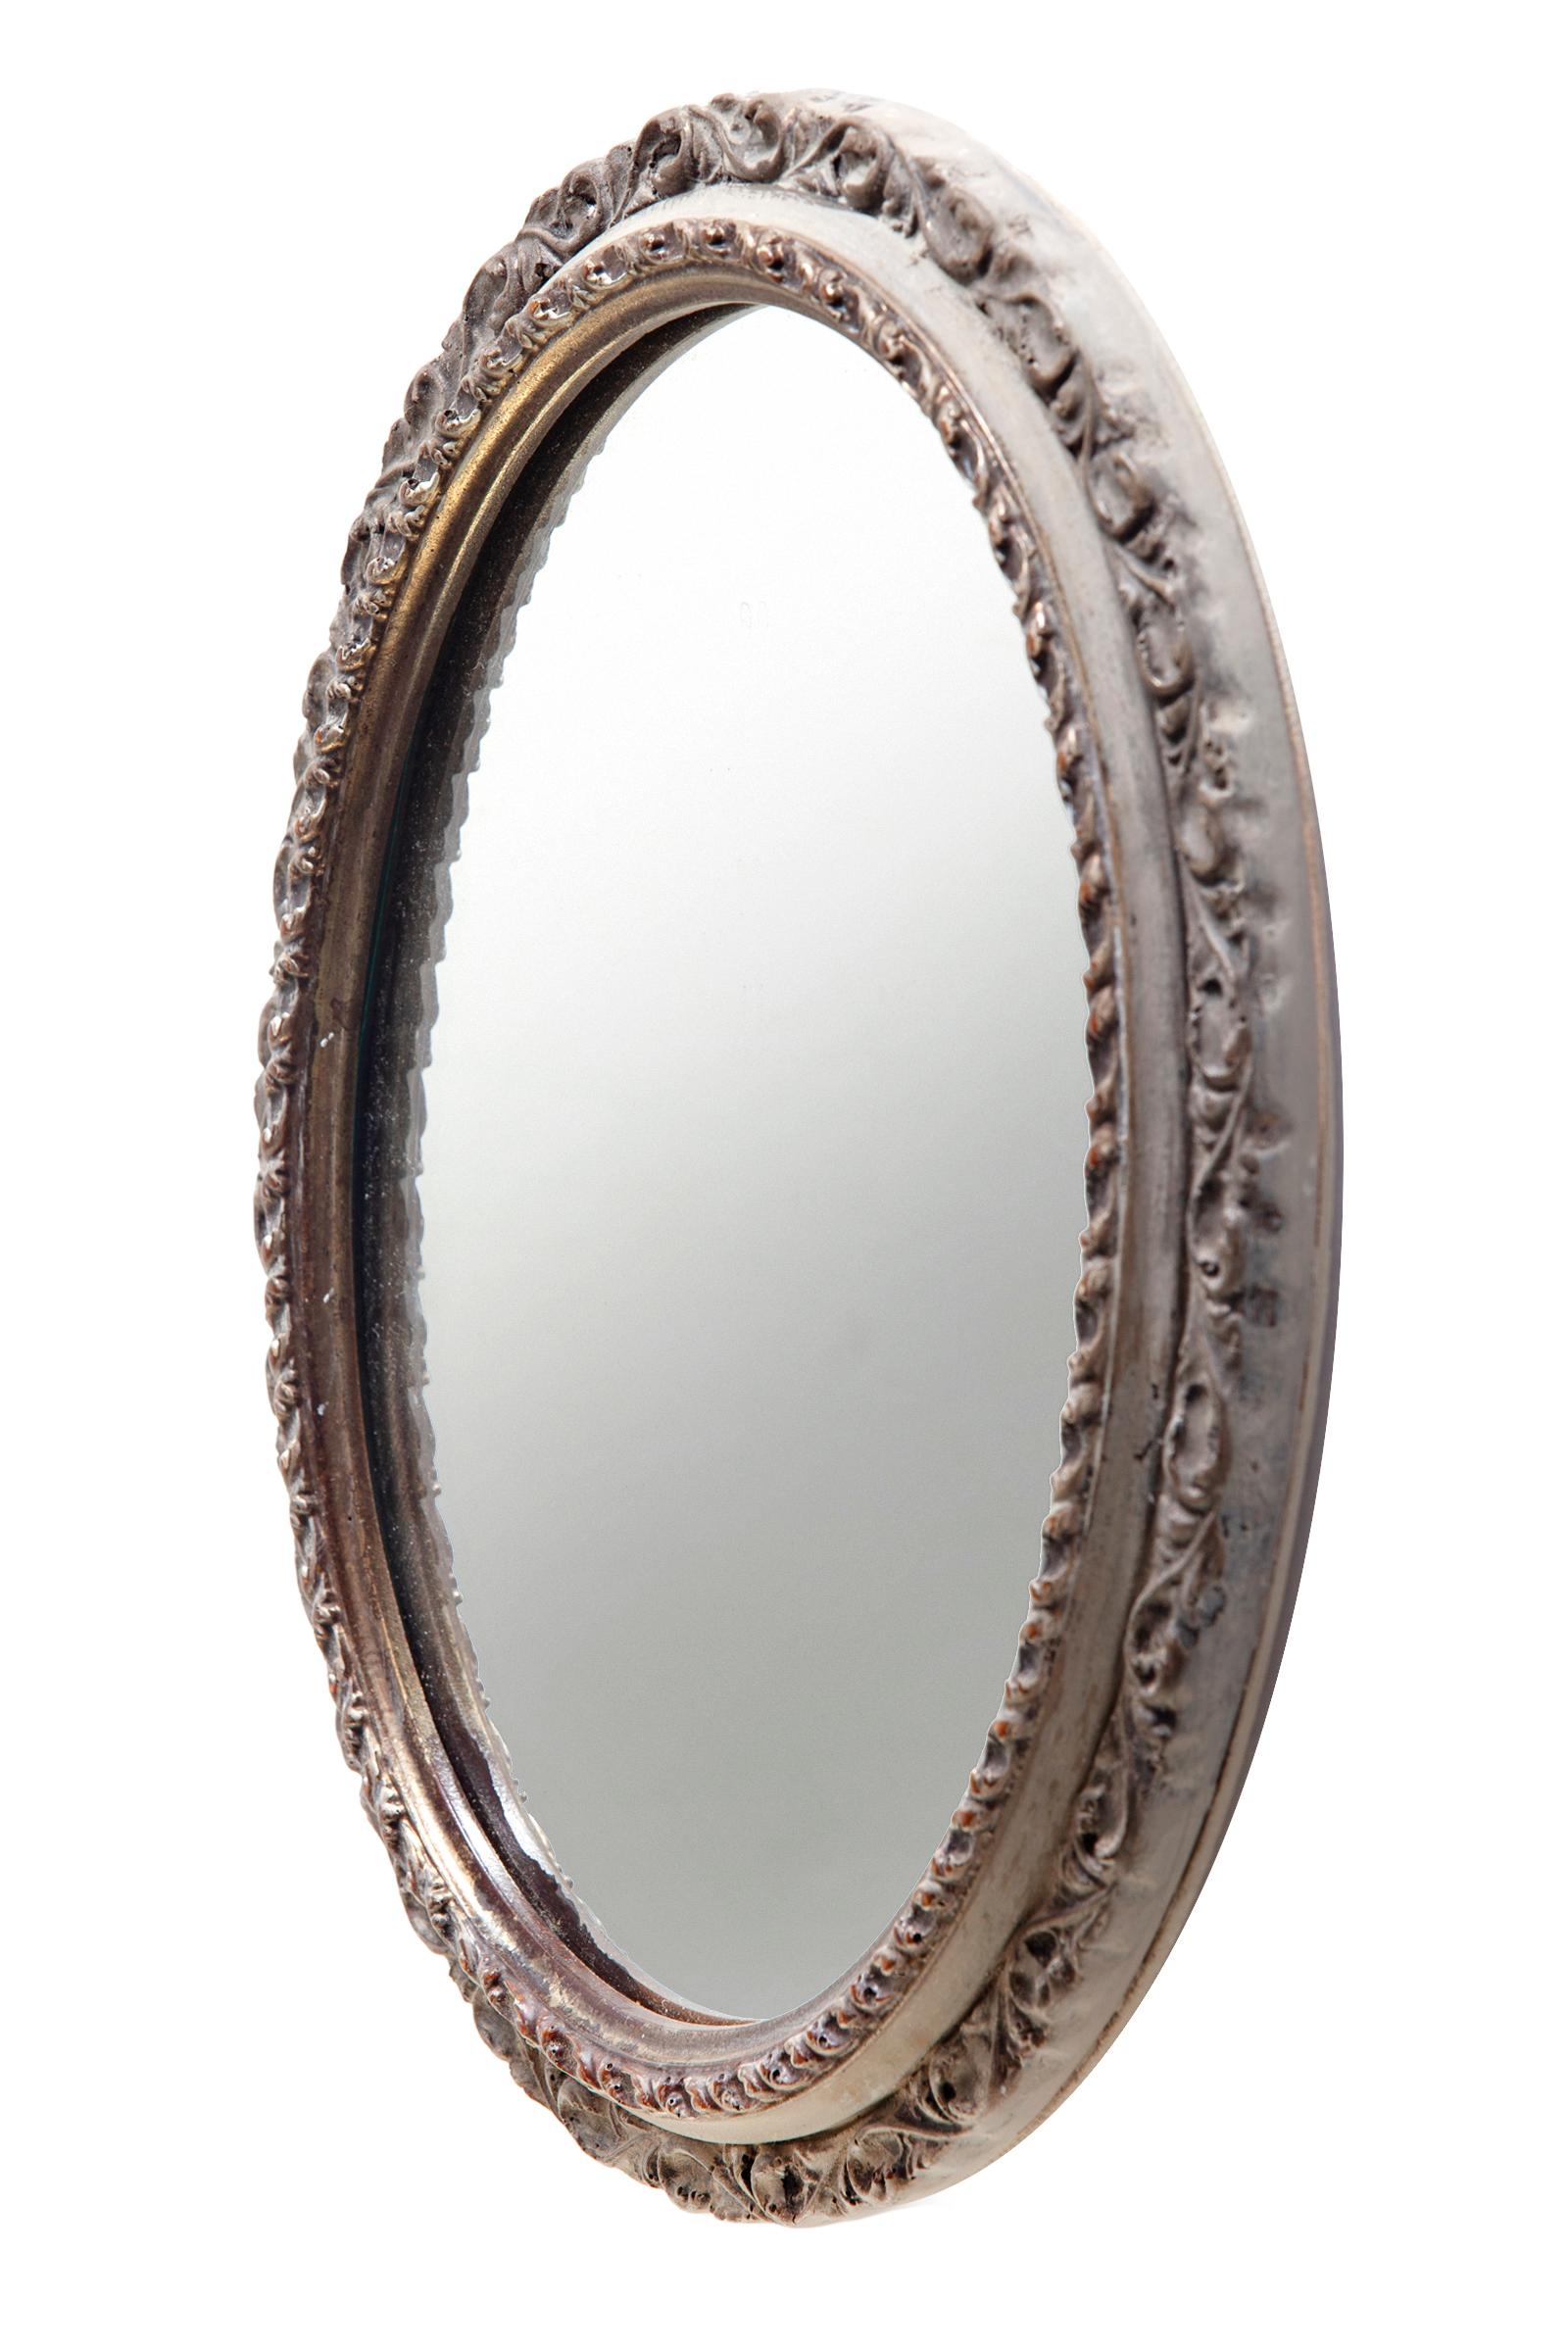 Pretty little French style oval mirror with aged finish over a dark gilding.
New backing, wired to hang both ways.